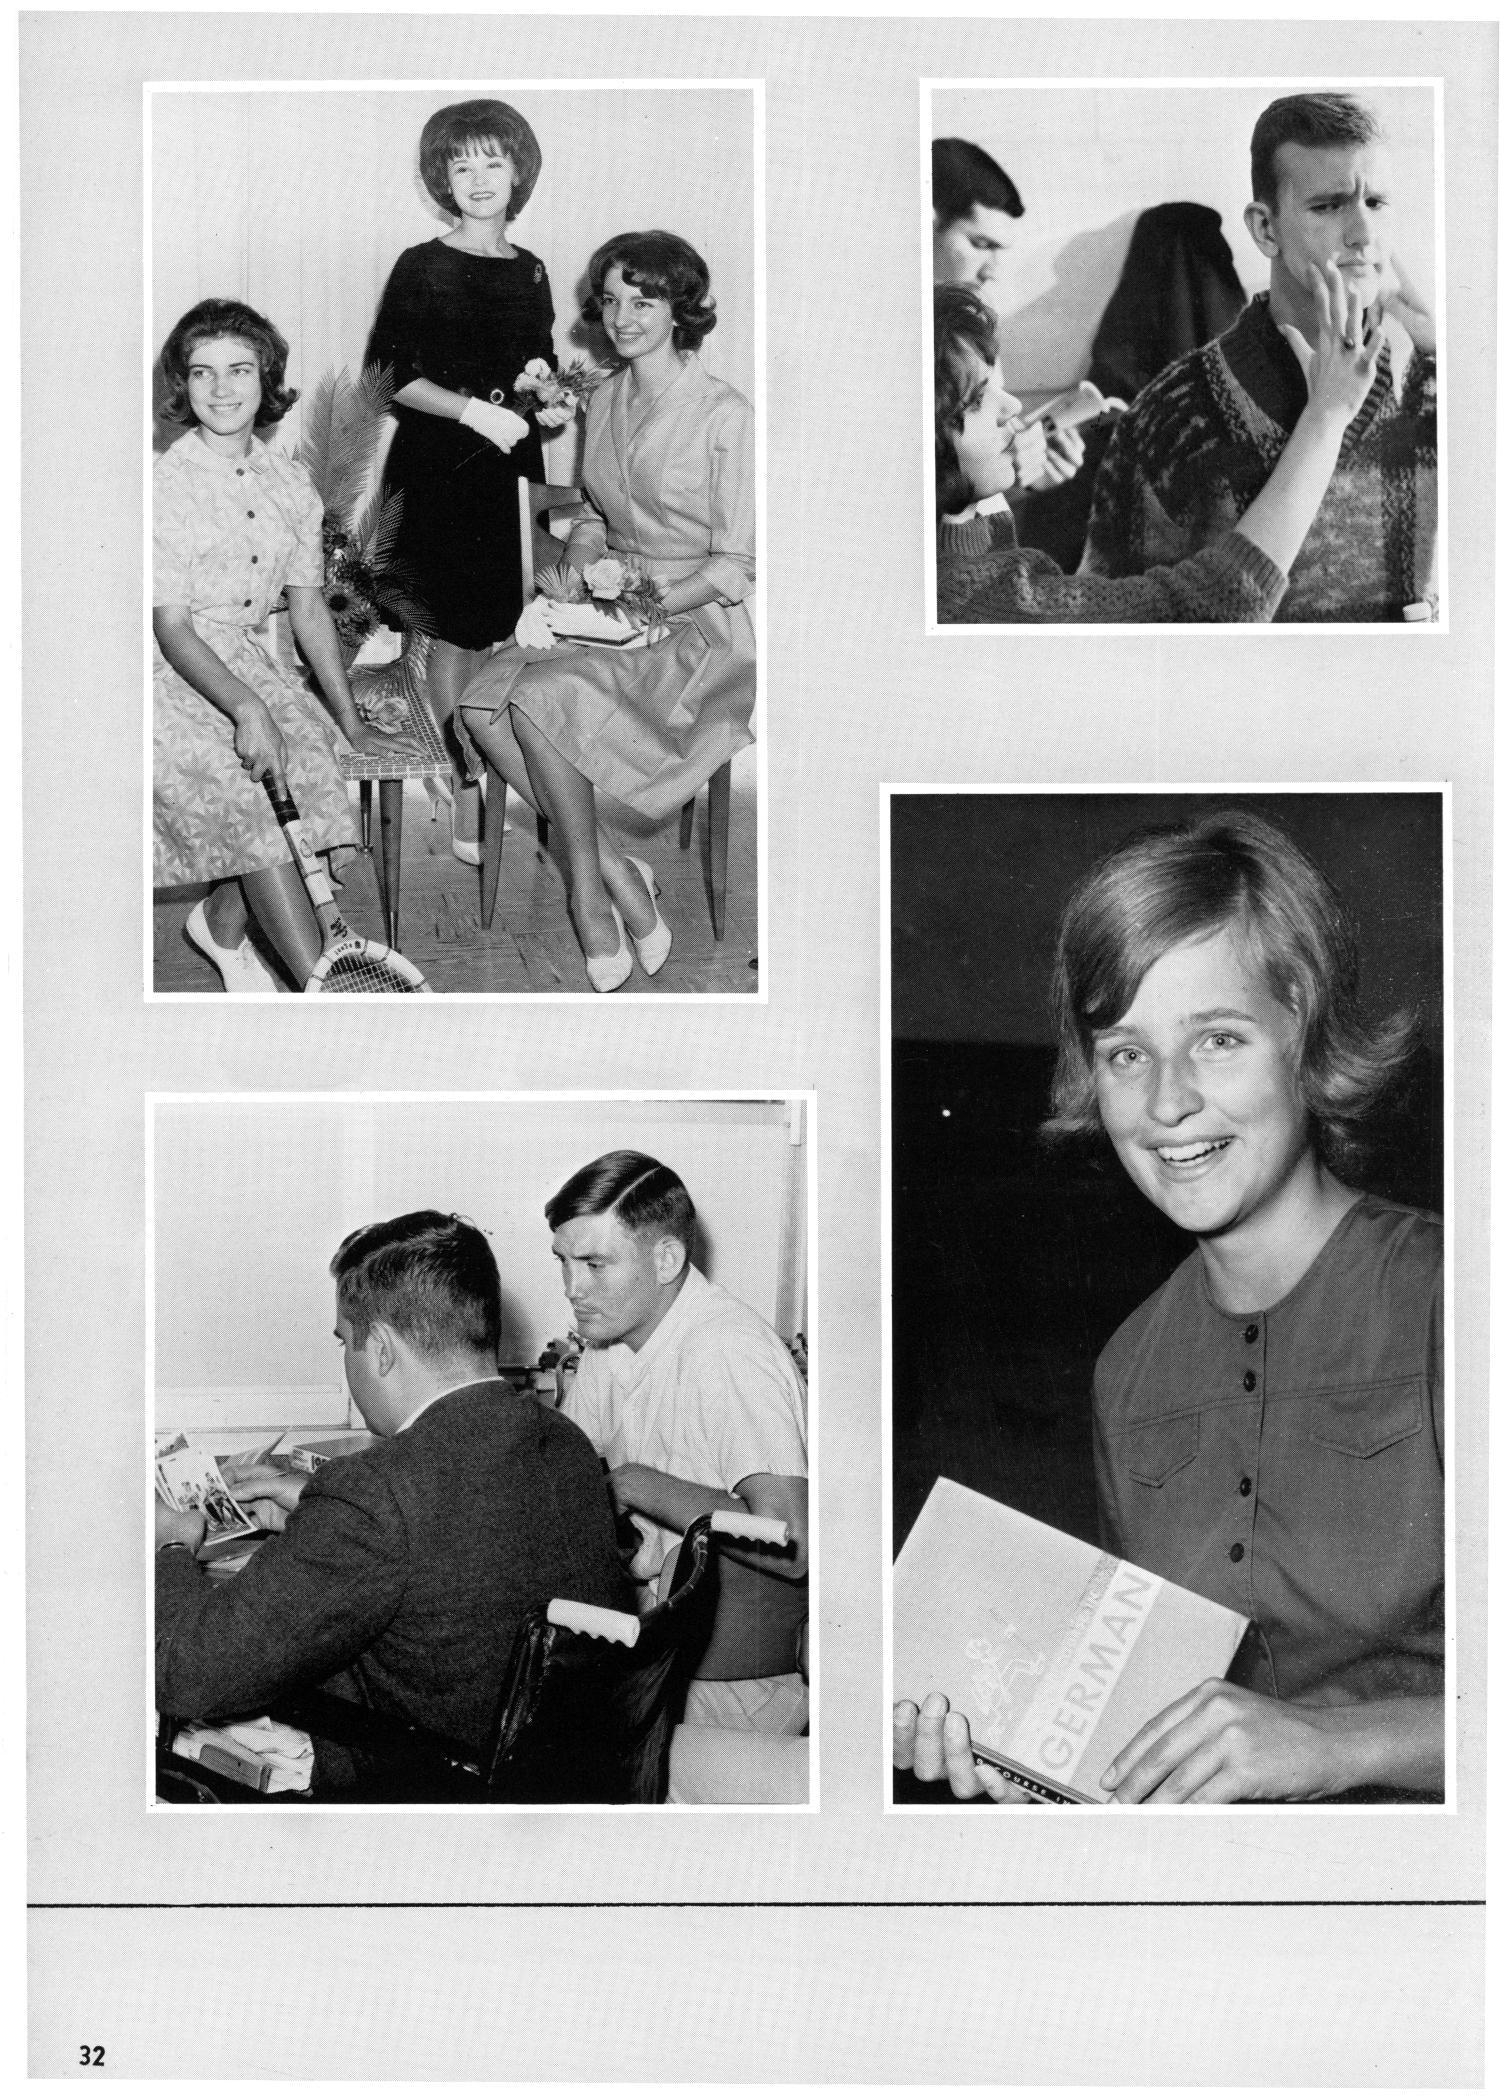 The Yellow Jacket, Yearbook of Thomas Jefferson High School, 1964
                                                
                                                    32
                                                